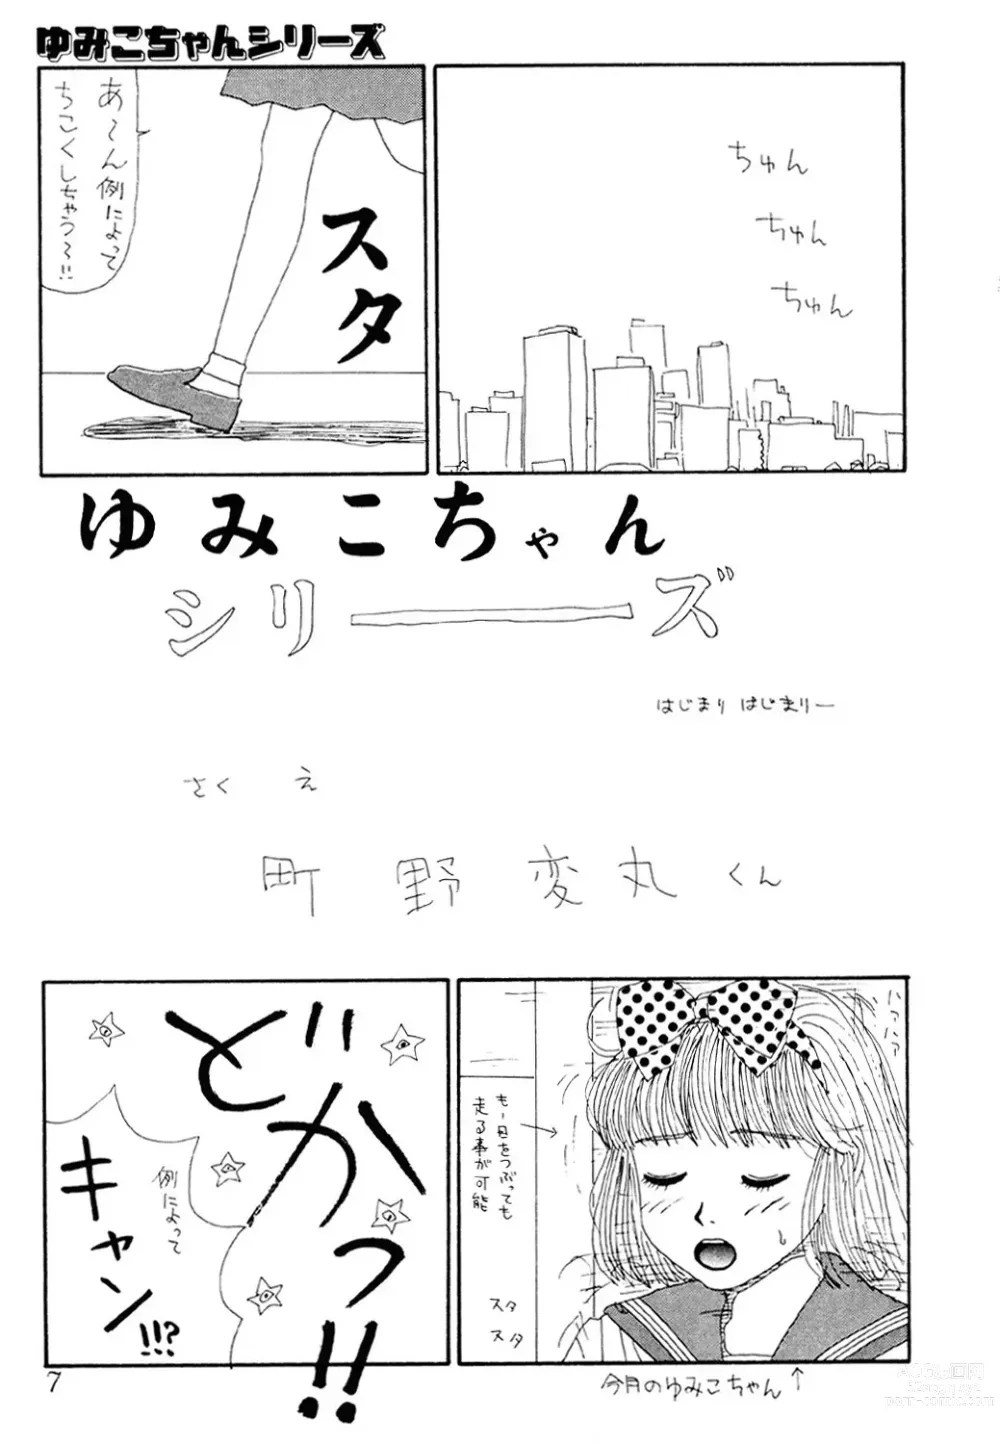 Page 6 of manga THE BEST of YUMIKO-chan